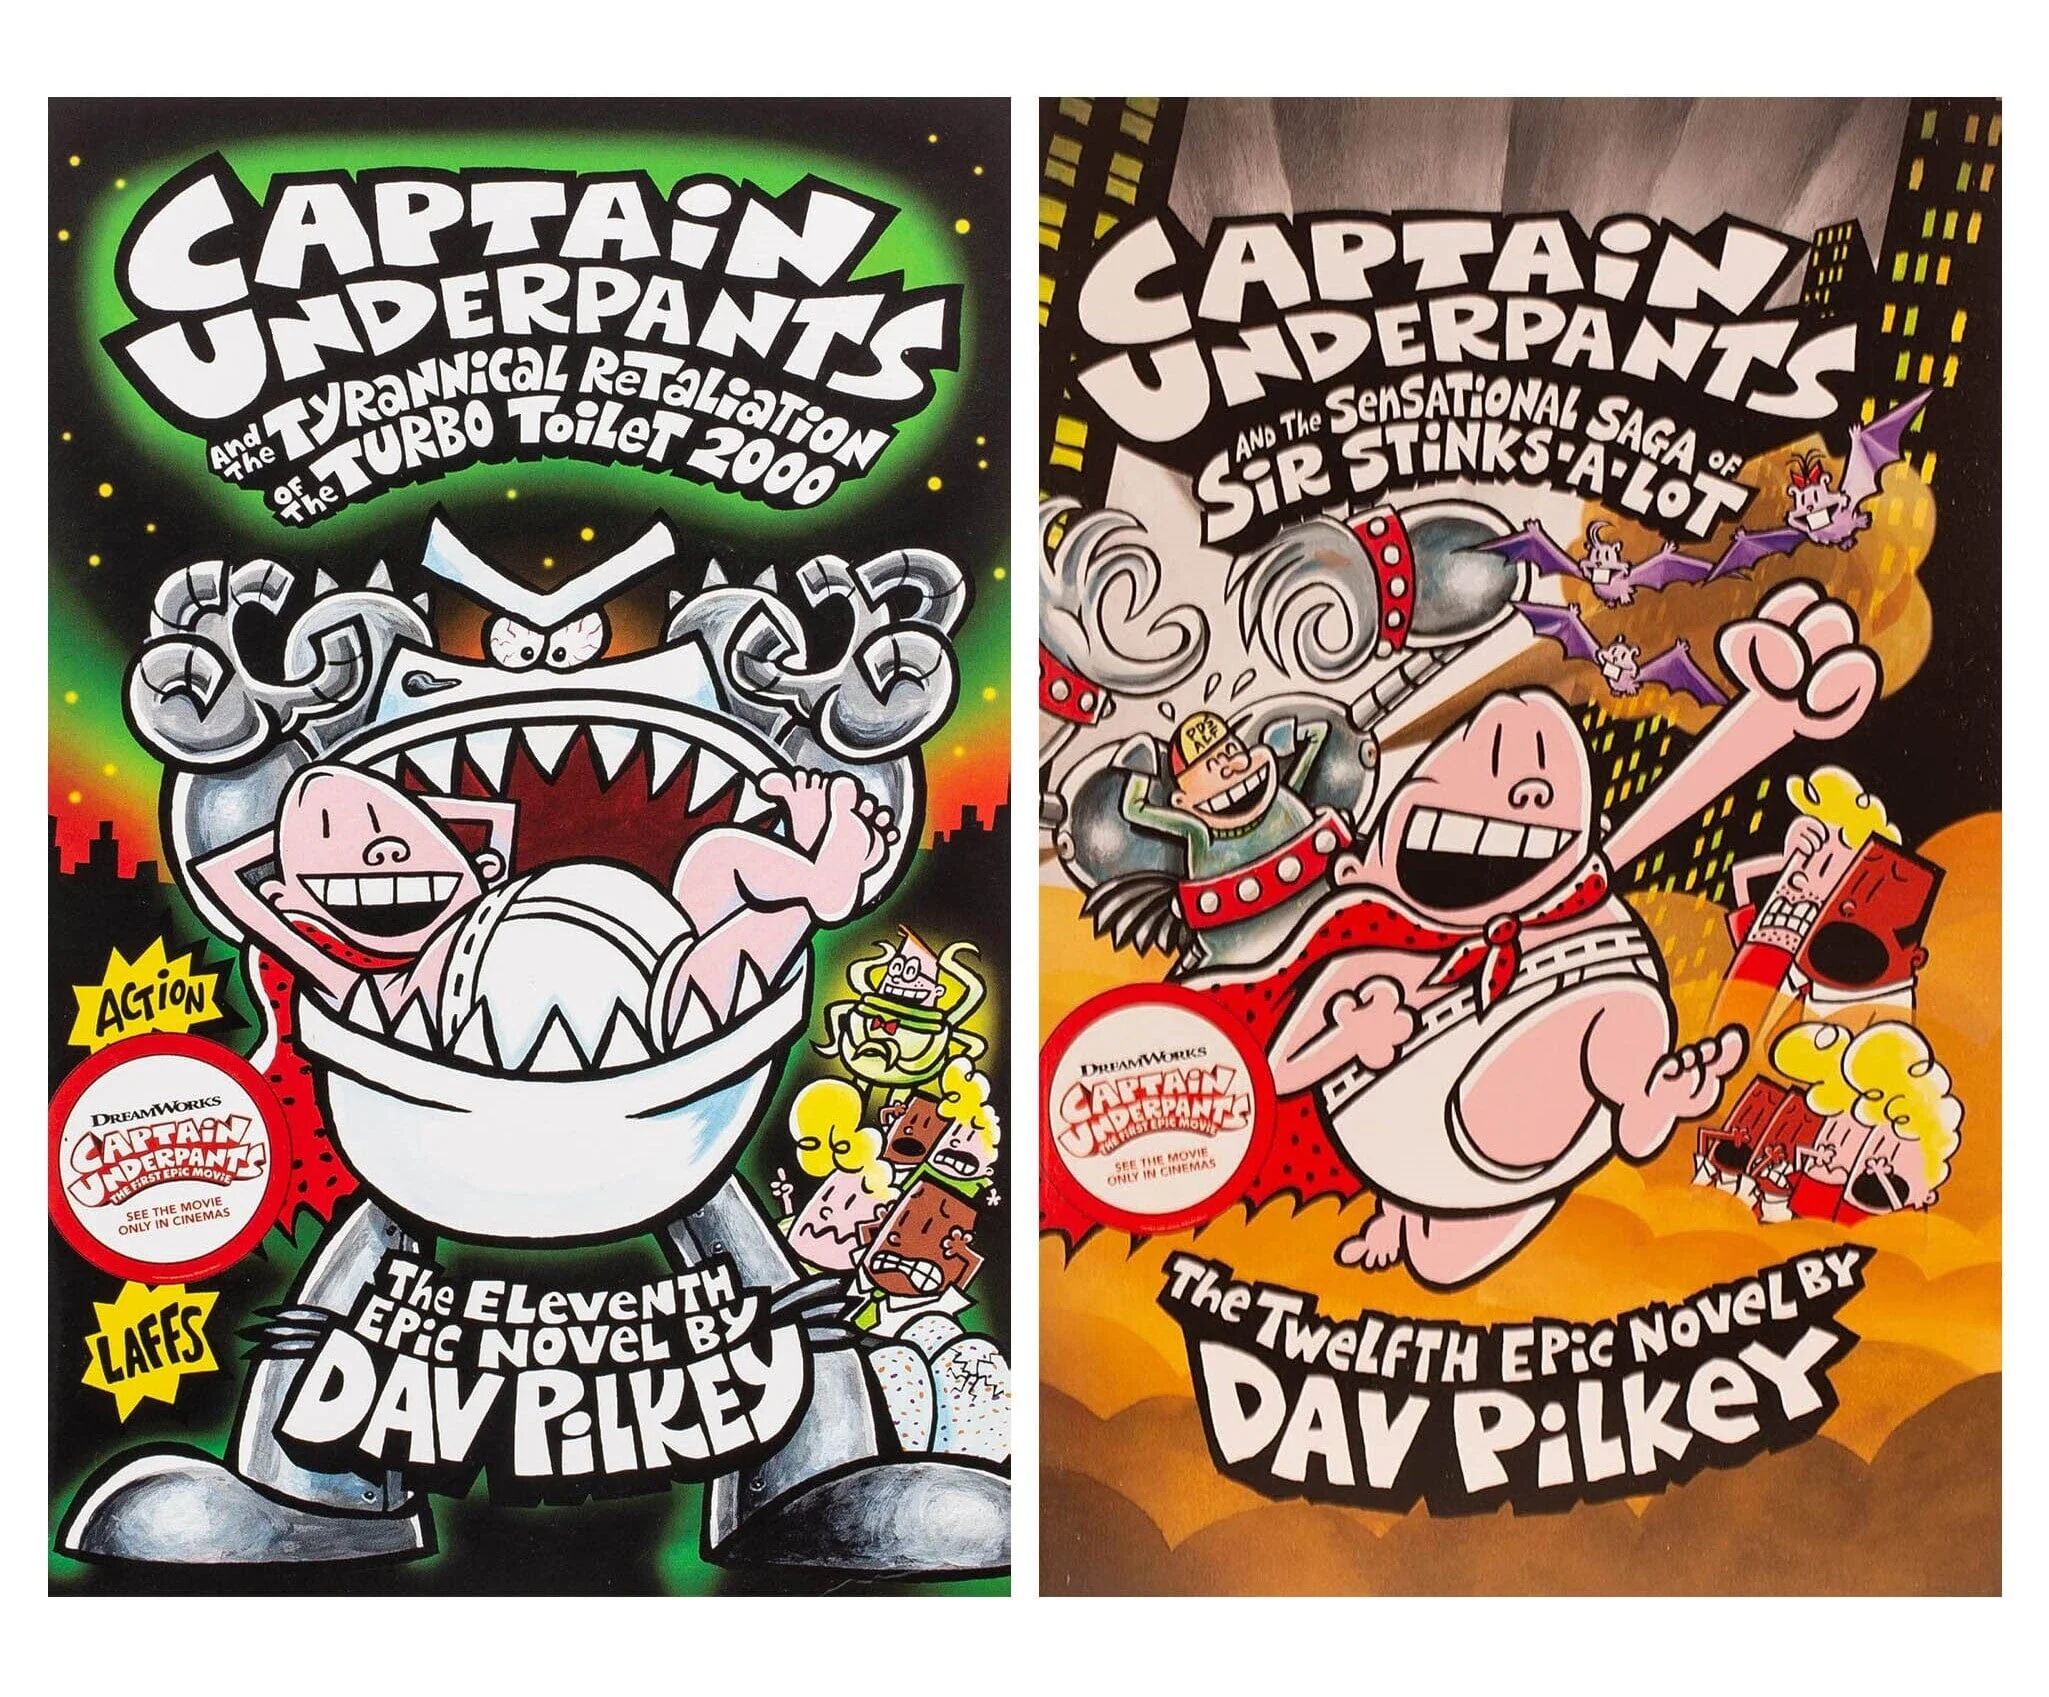 Captain Underpants Book 11 & 12 By Dav Pilkey 2 Books Collection Set - Ages 7-9 - Paperback Scholastic